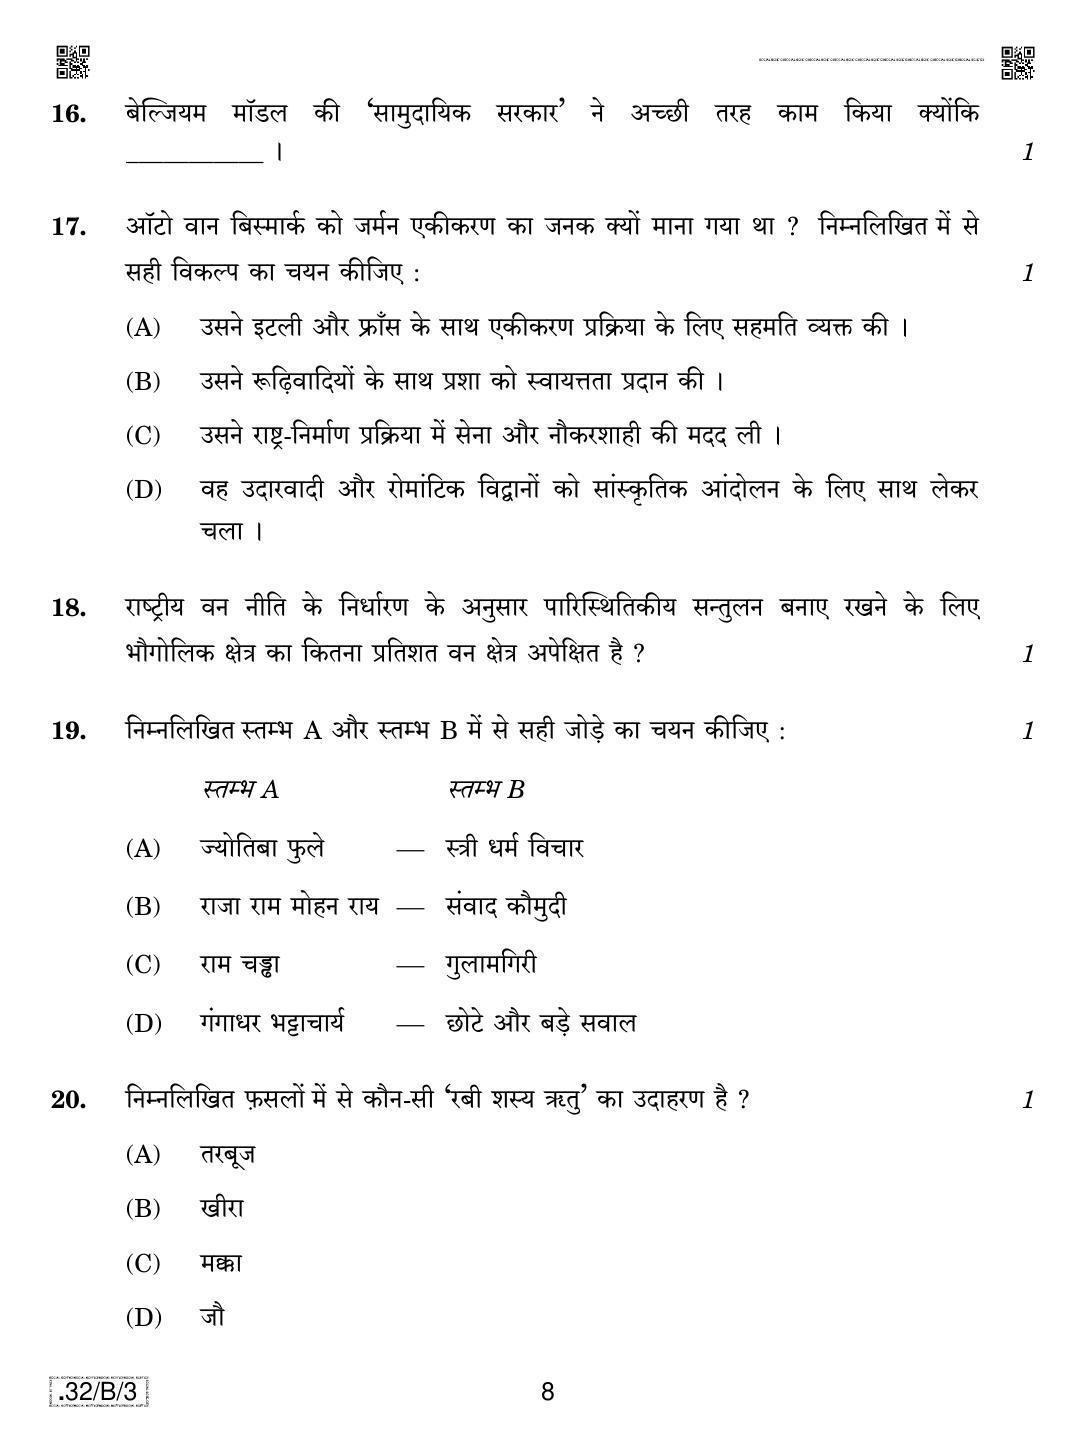 CBSE Class 10 32-C-3 Social Science 2020 Compartment Question Paper - Page 8